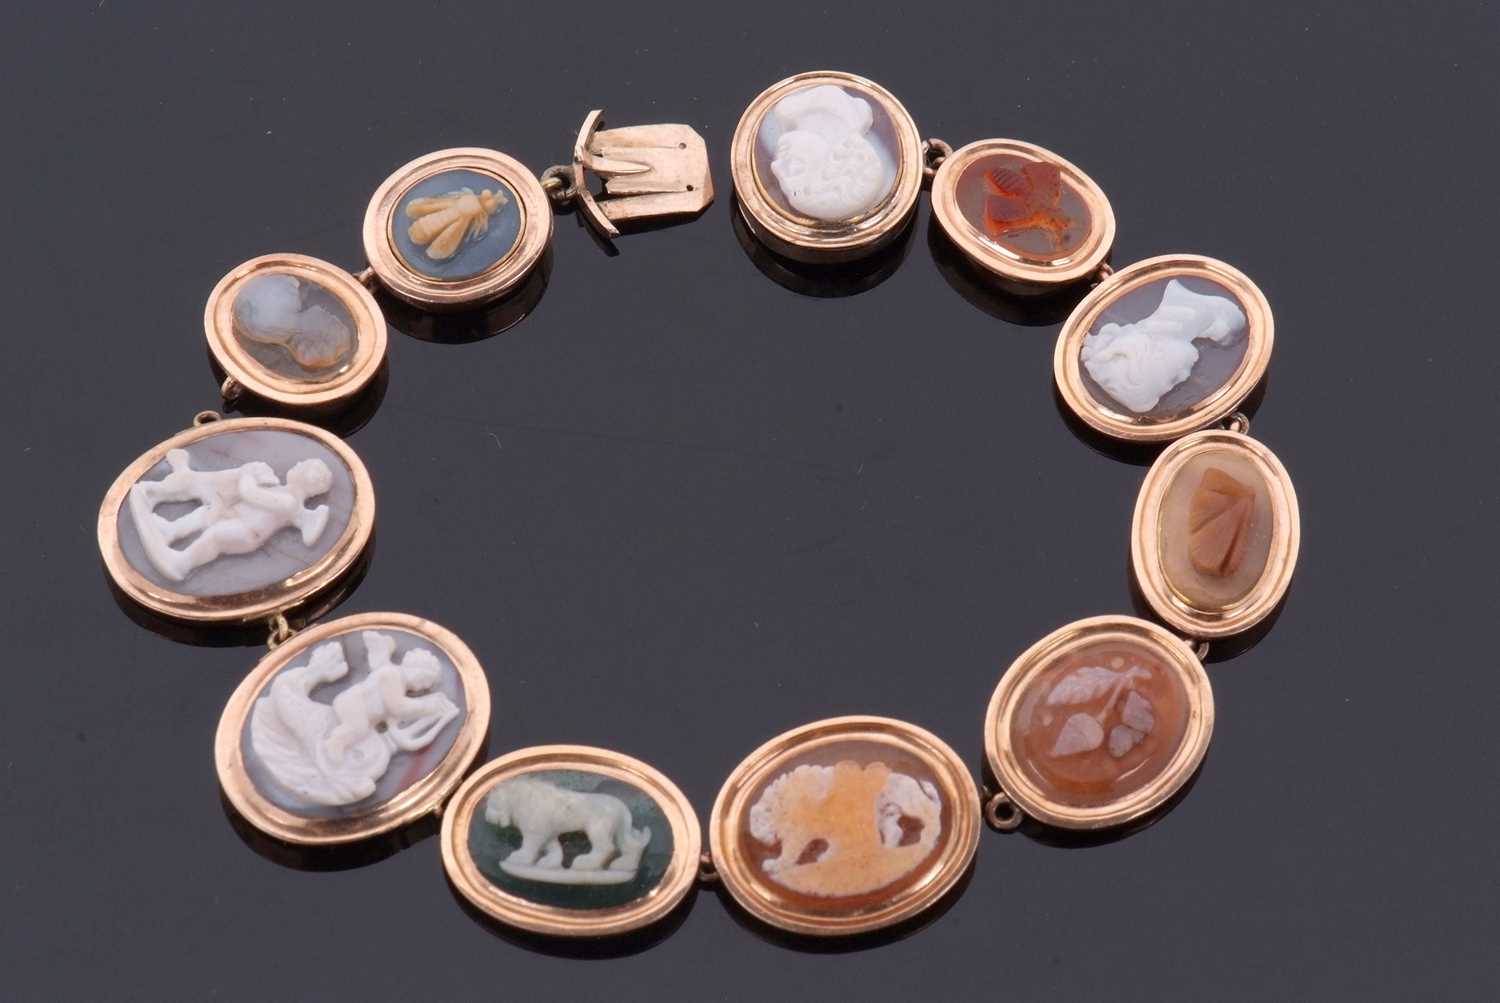 A hardstone cameo bracelet, set with oval hardstones carved with cherubs, animals, insects, portrait